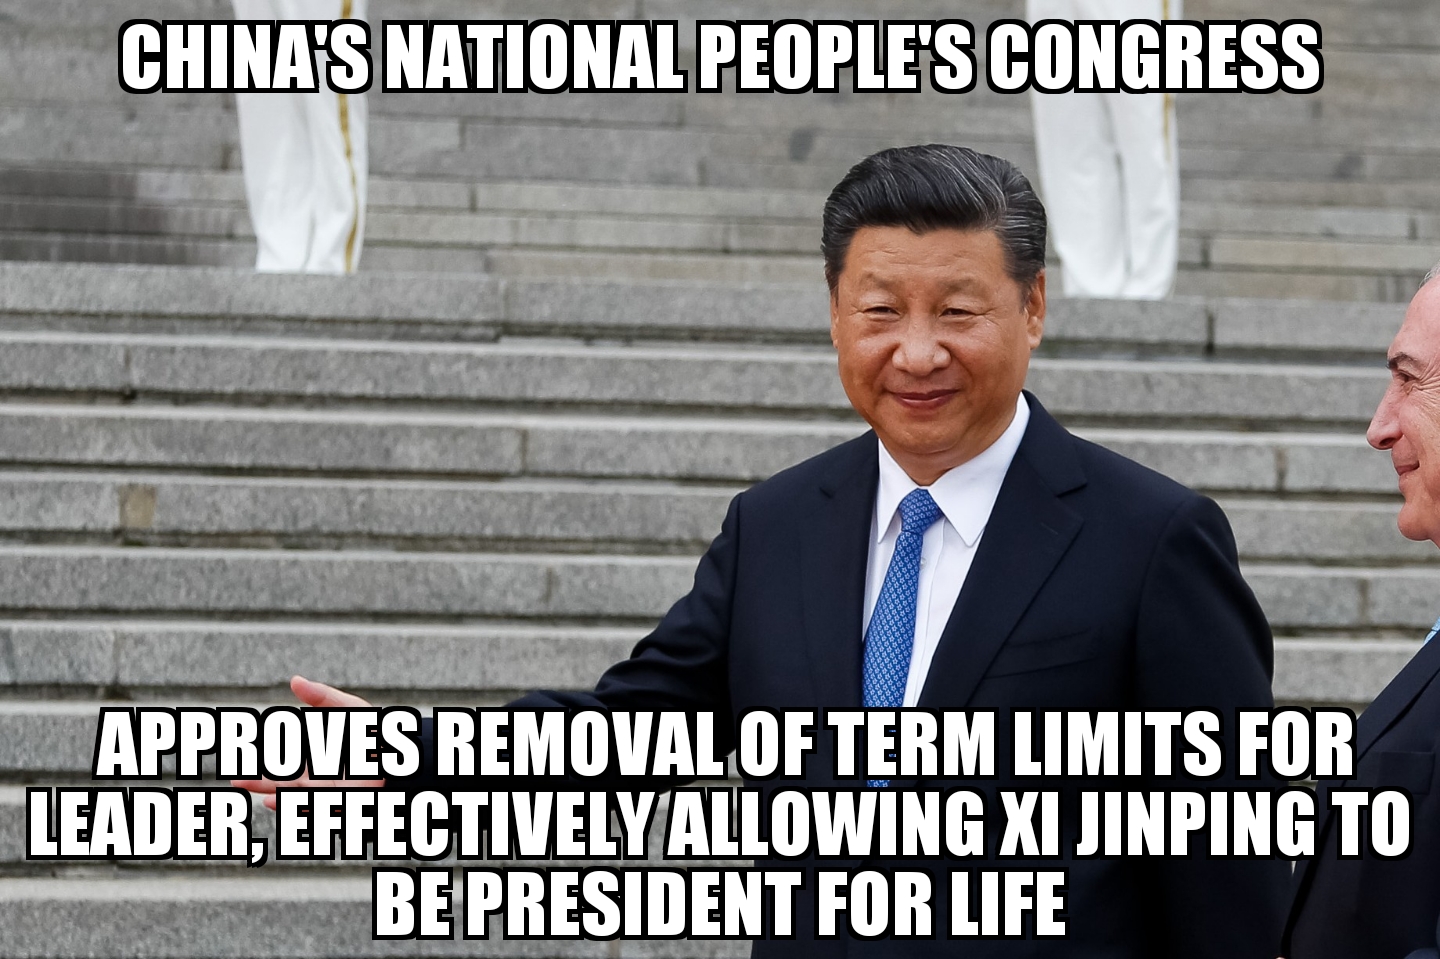 China approves removal of presidential term limits